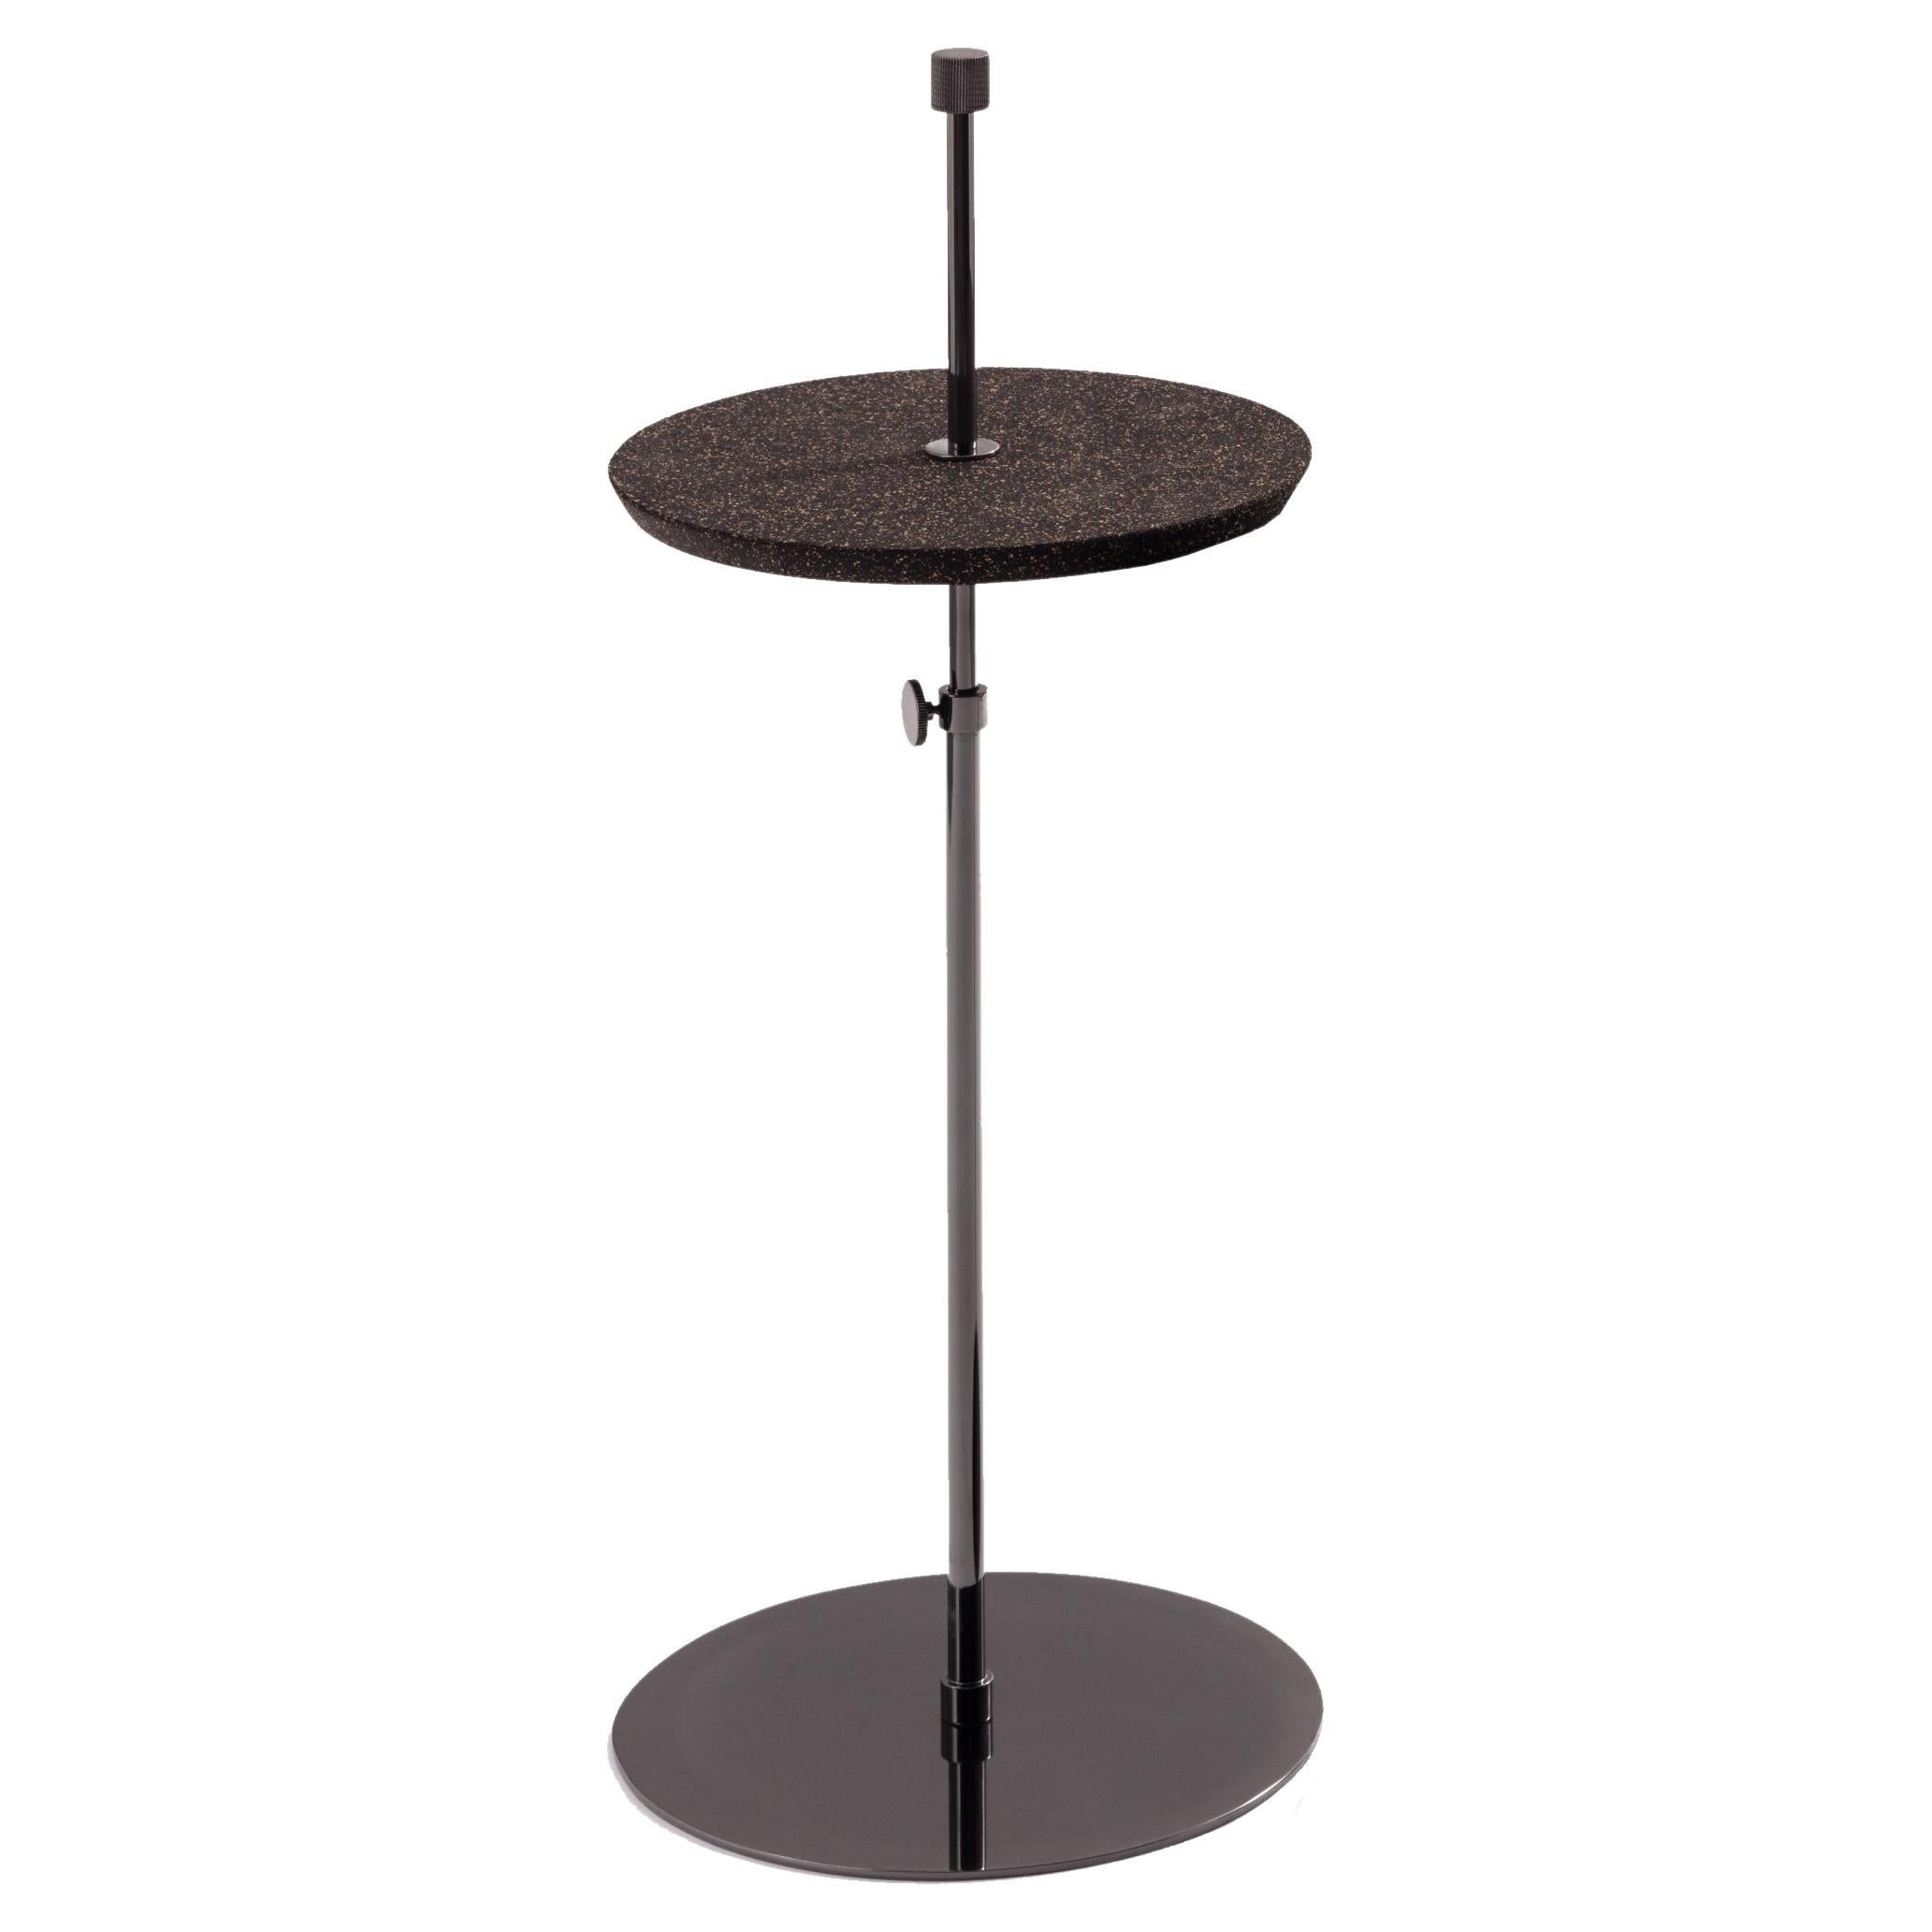 The disco side table was developed to be easy, both in transport and height adjustment, so it adapts to any indoor environment.
The height of the top can be adjusted using the pin located next to the stem, its finishes, like the entire Disco